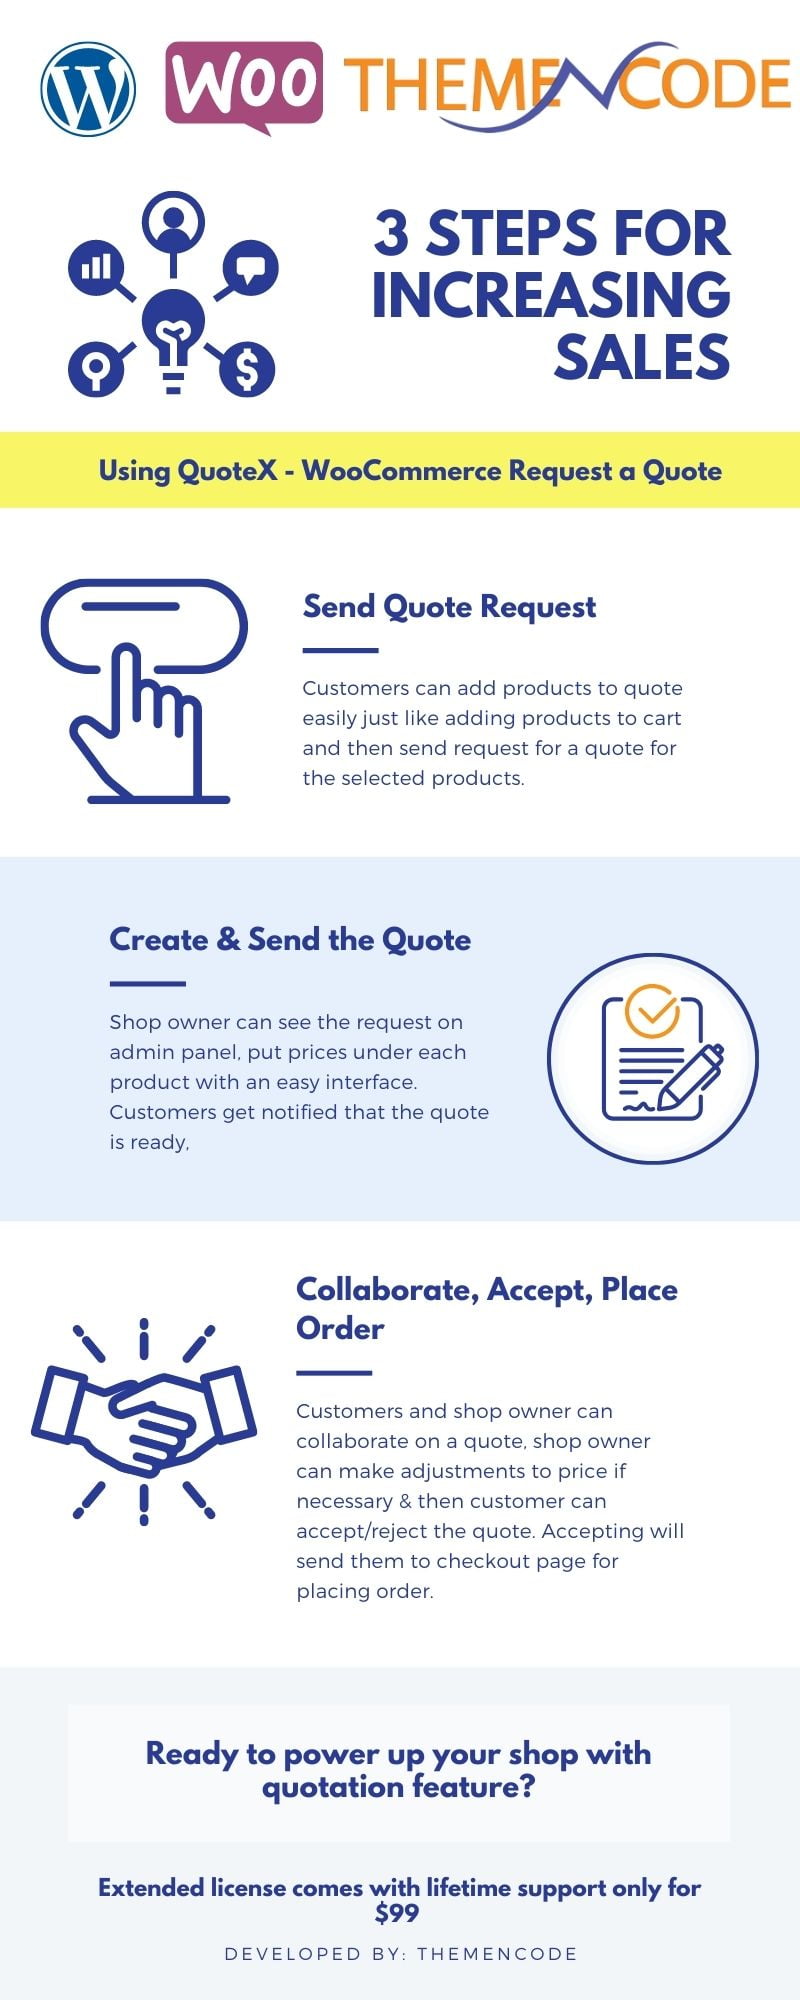 QuoteX - WooCommerce Request a Quote - 2